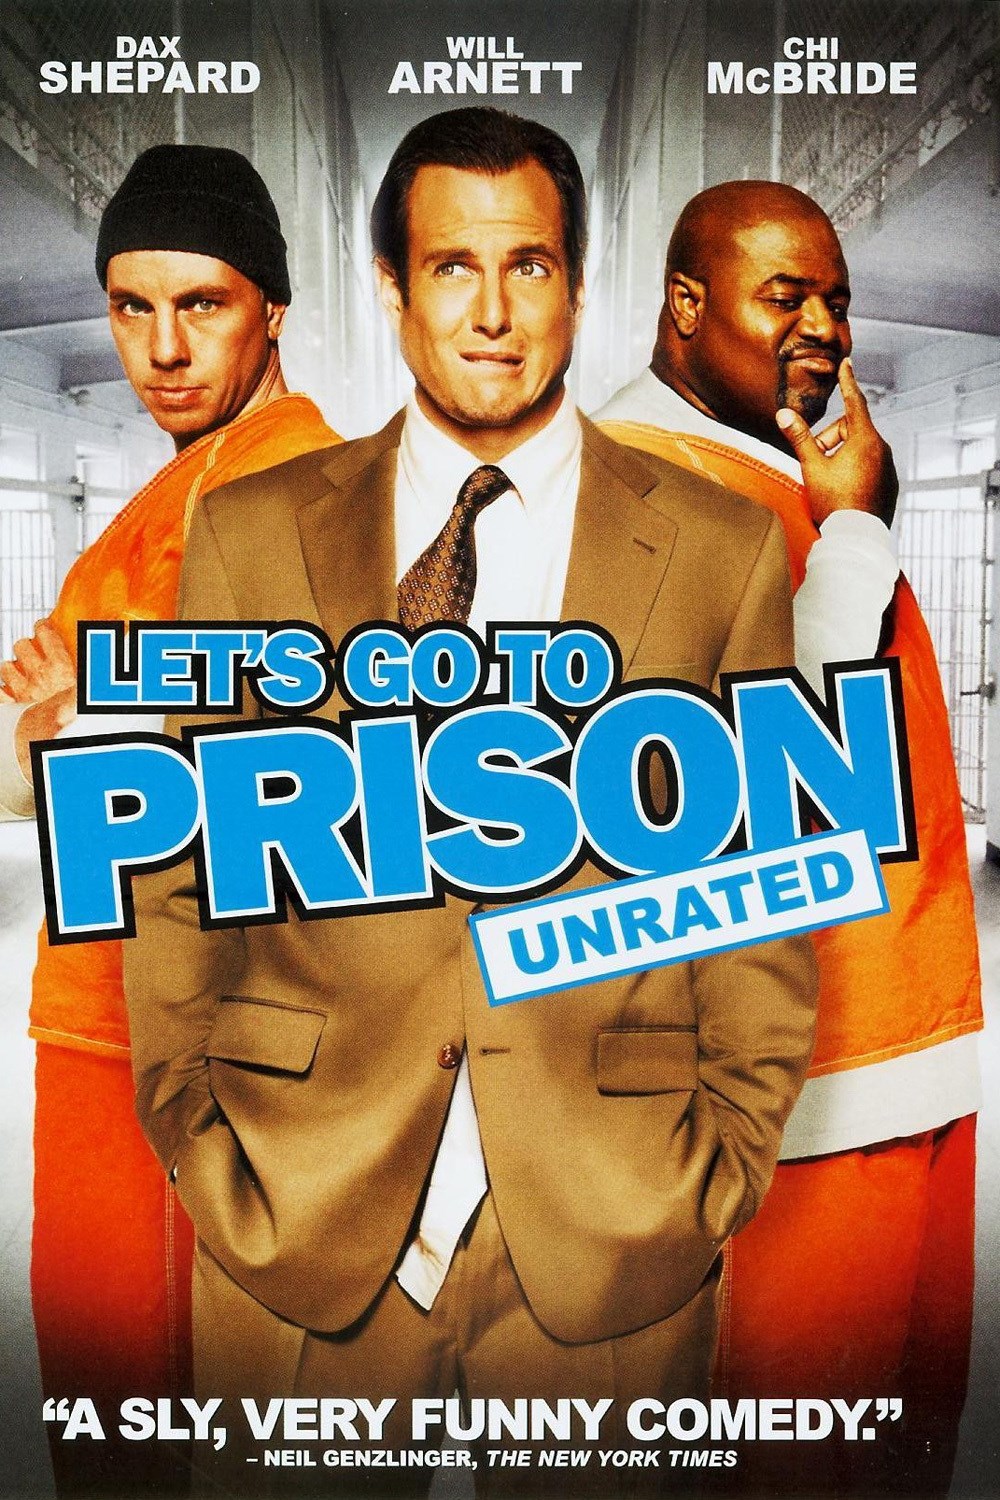 Lets Go To Prison Unrated (2006) Dvdrip Xvid - Diamond